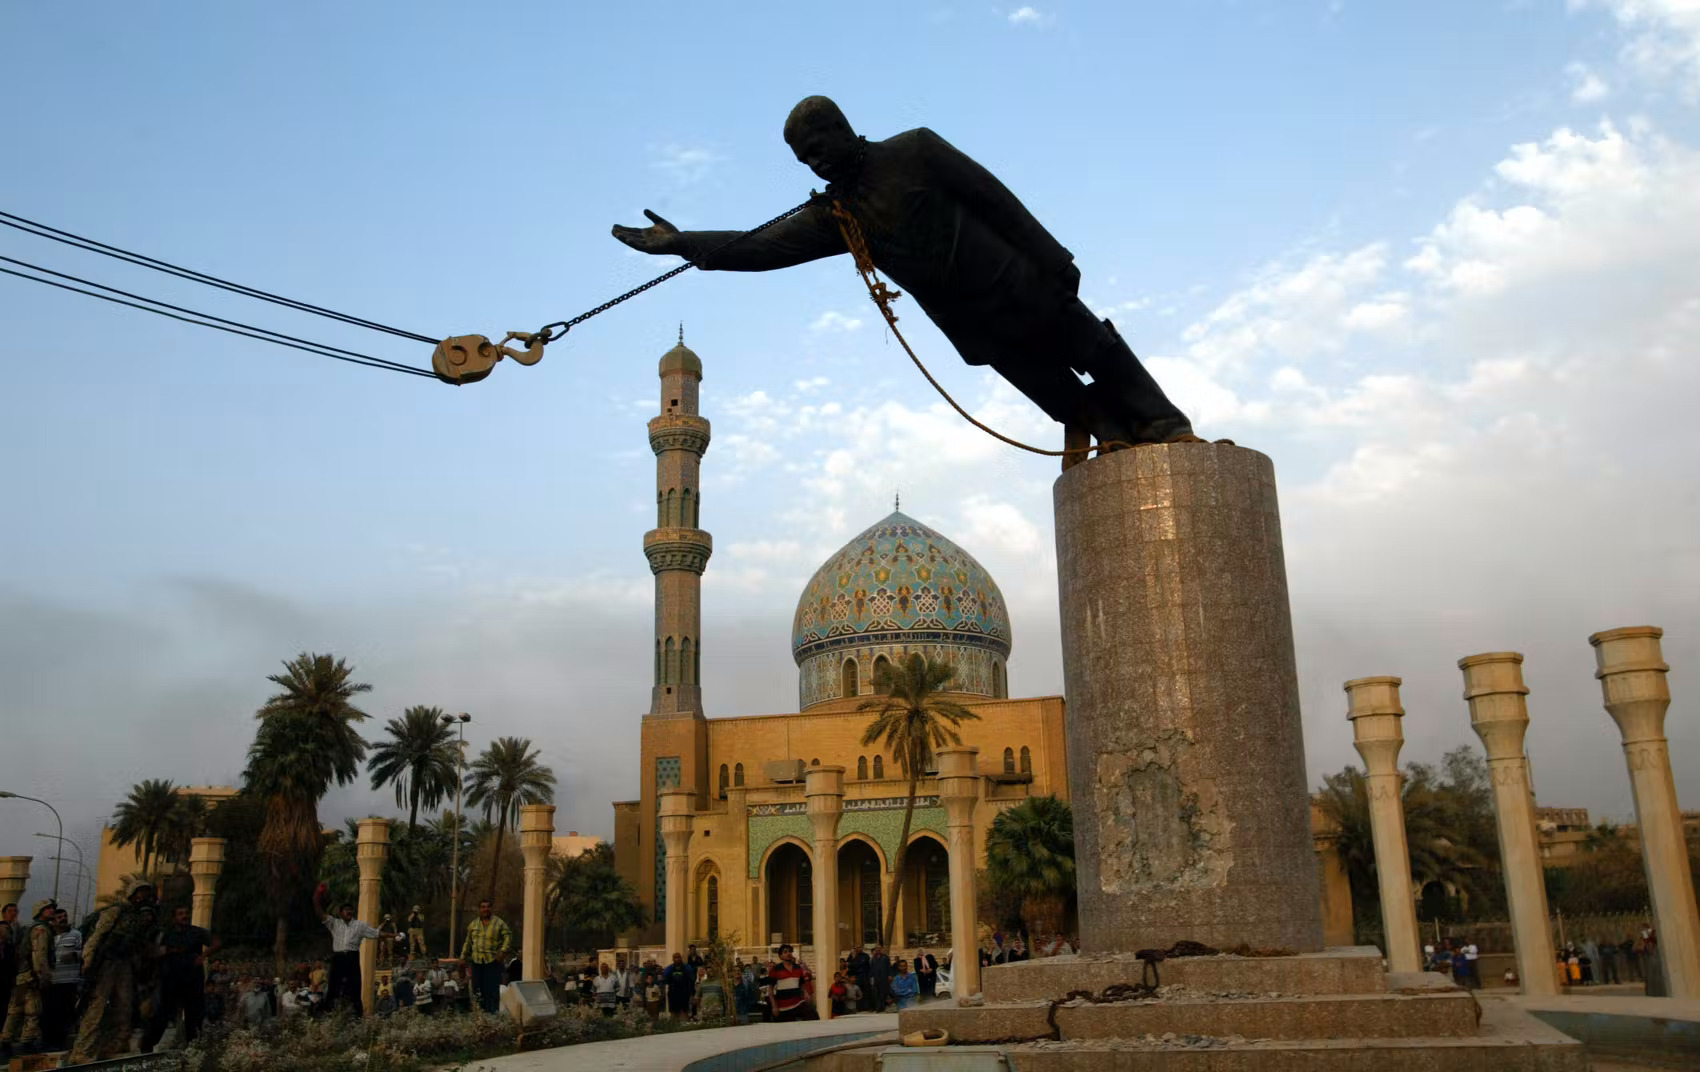 Photograph of Toppling of Statue of Saddam Hussein, 2003 (Firdos Square, Baghdad). Photo: Public Domain.